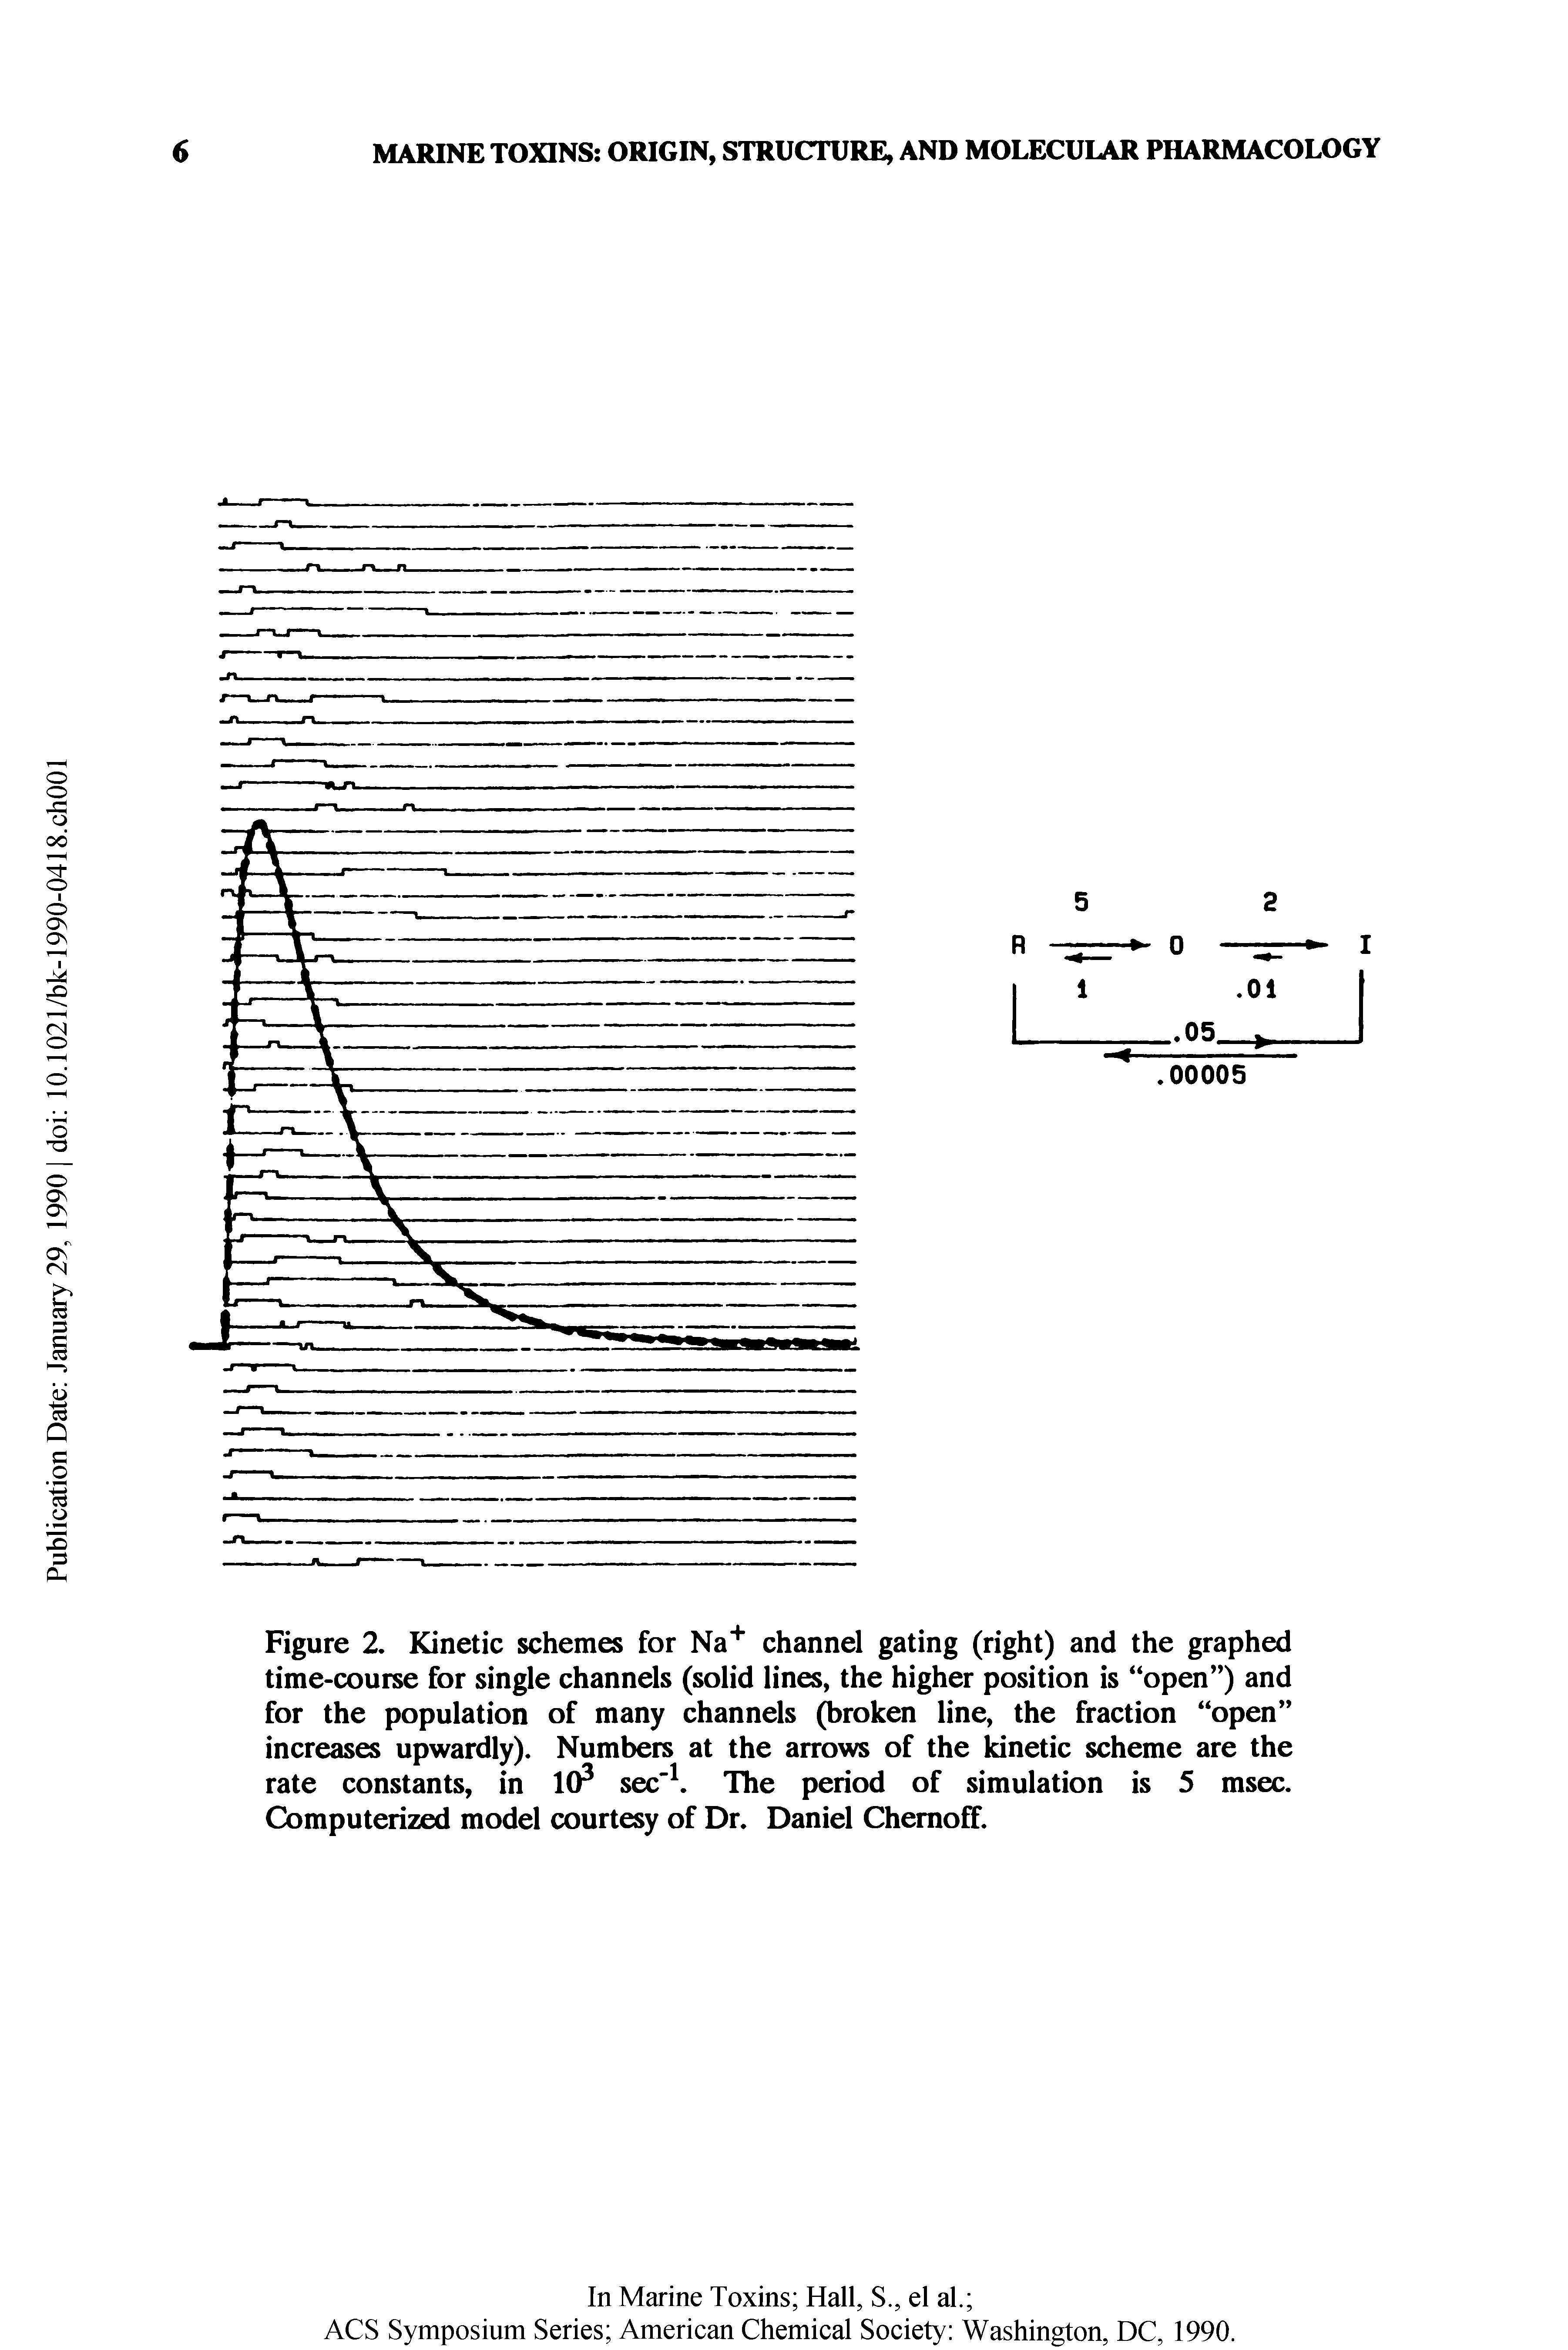 Figure 2. Kinetic schemes for Na channel gating (right) and the graphed time-course for single channels (solid lines, the higher position is open ) and for the population of many channels (broken line, the fraction open increases upwardly). Numbers at the arrows of the kinetic scheme are the rate constants, in 10 sec" The period of simulation is 5 msec. Computerized model courtesy of Dr. Daniel Chemoff.